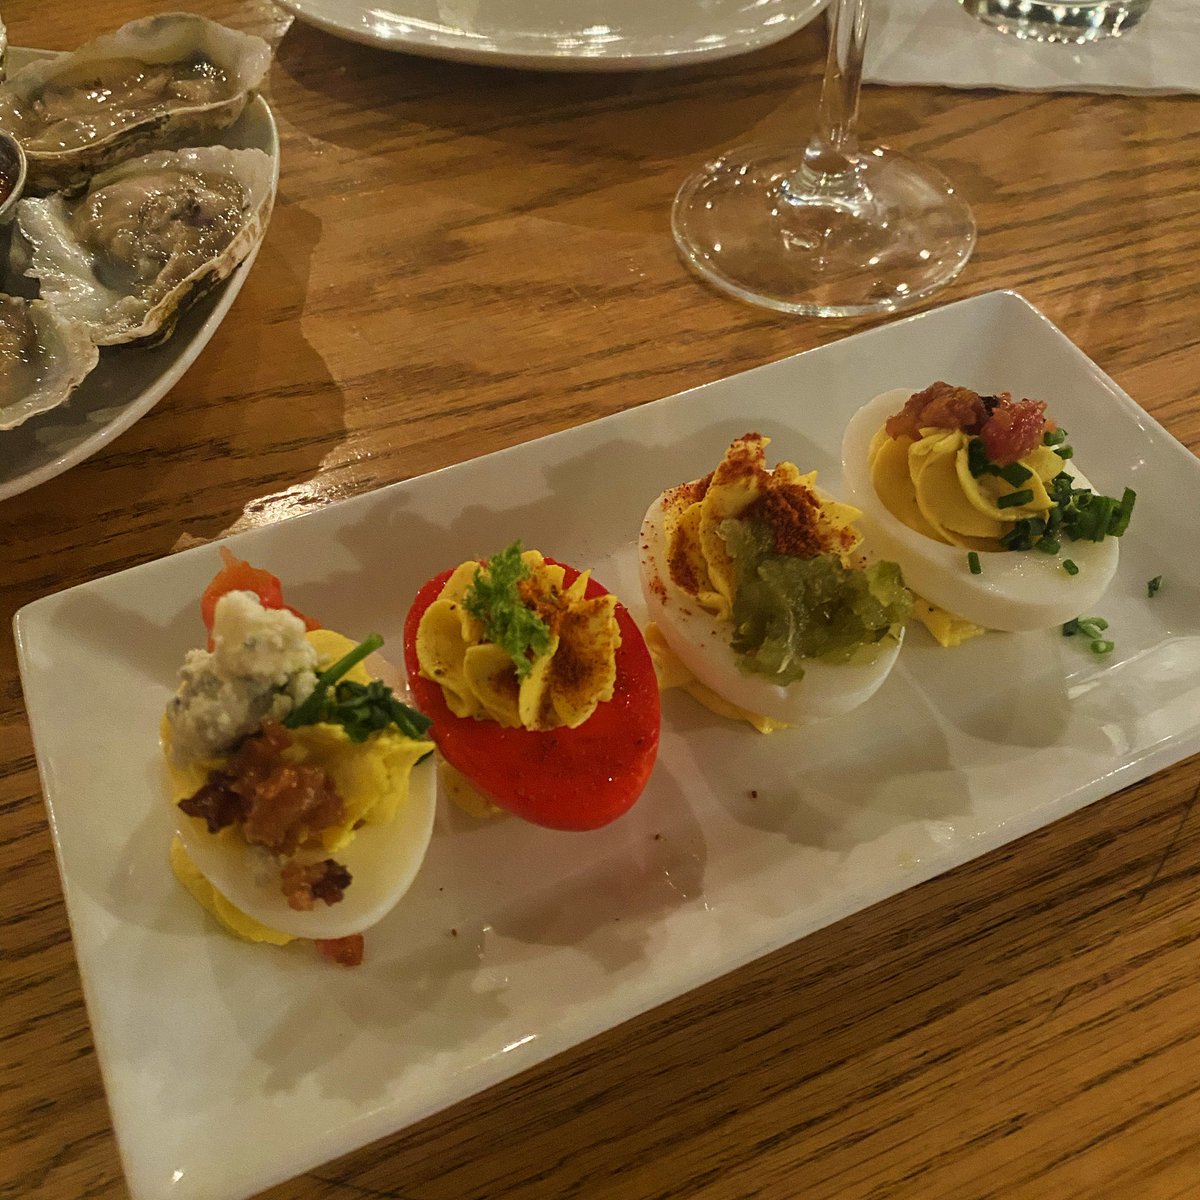 How do we feel about this flight of deviled eggs? 🤔✈️🤩🙌🏻 #food #yum #eggs #deviledeggs #tapas #foodie #flight #foodporn